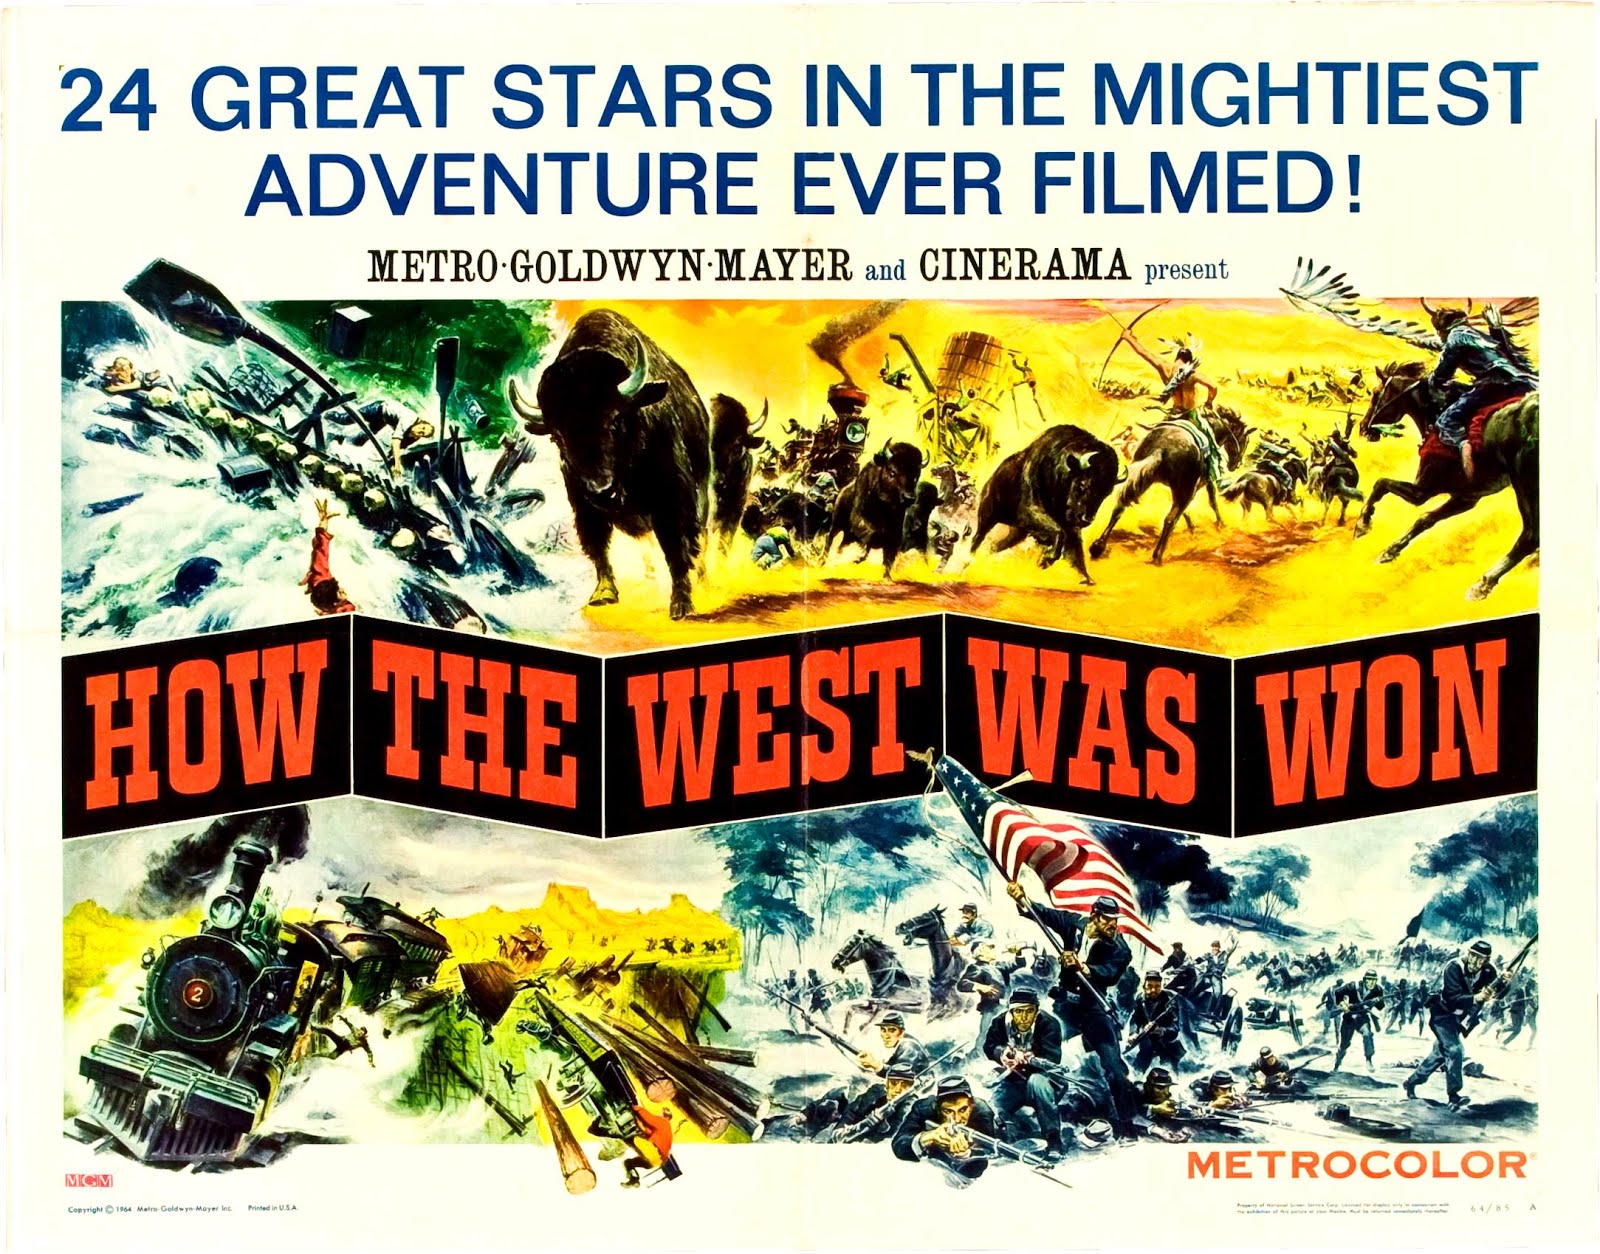 La conquête de l'ouest (1961) John Ford , Henry Hathaway , George Marshall - How the west was won